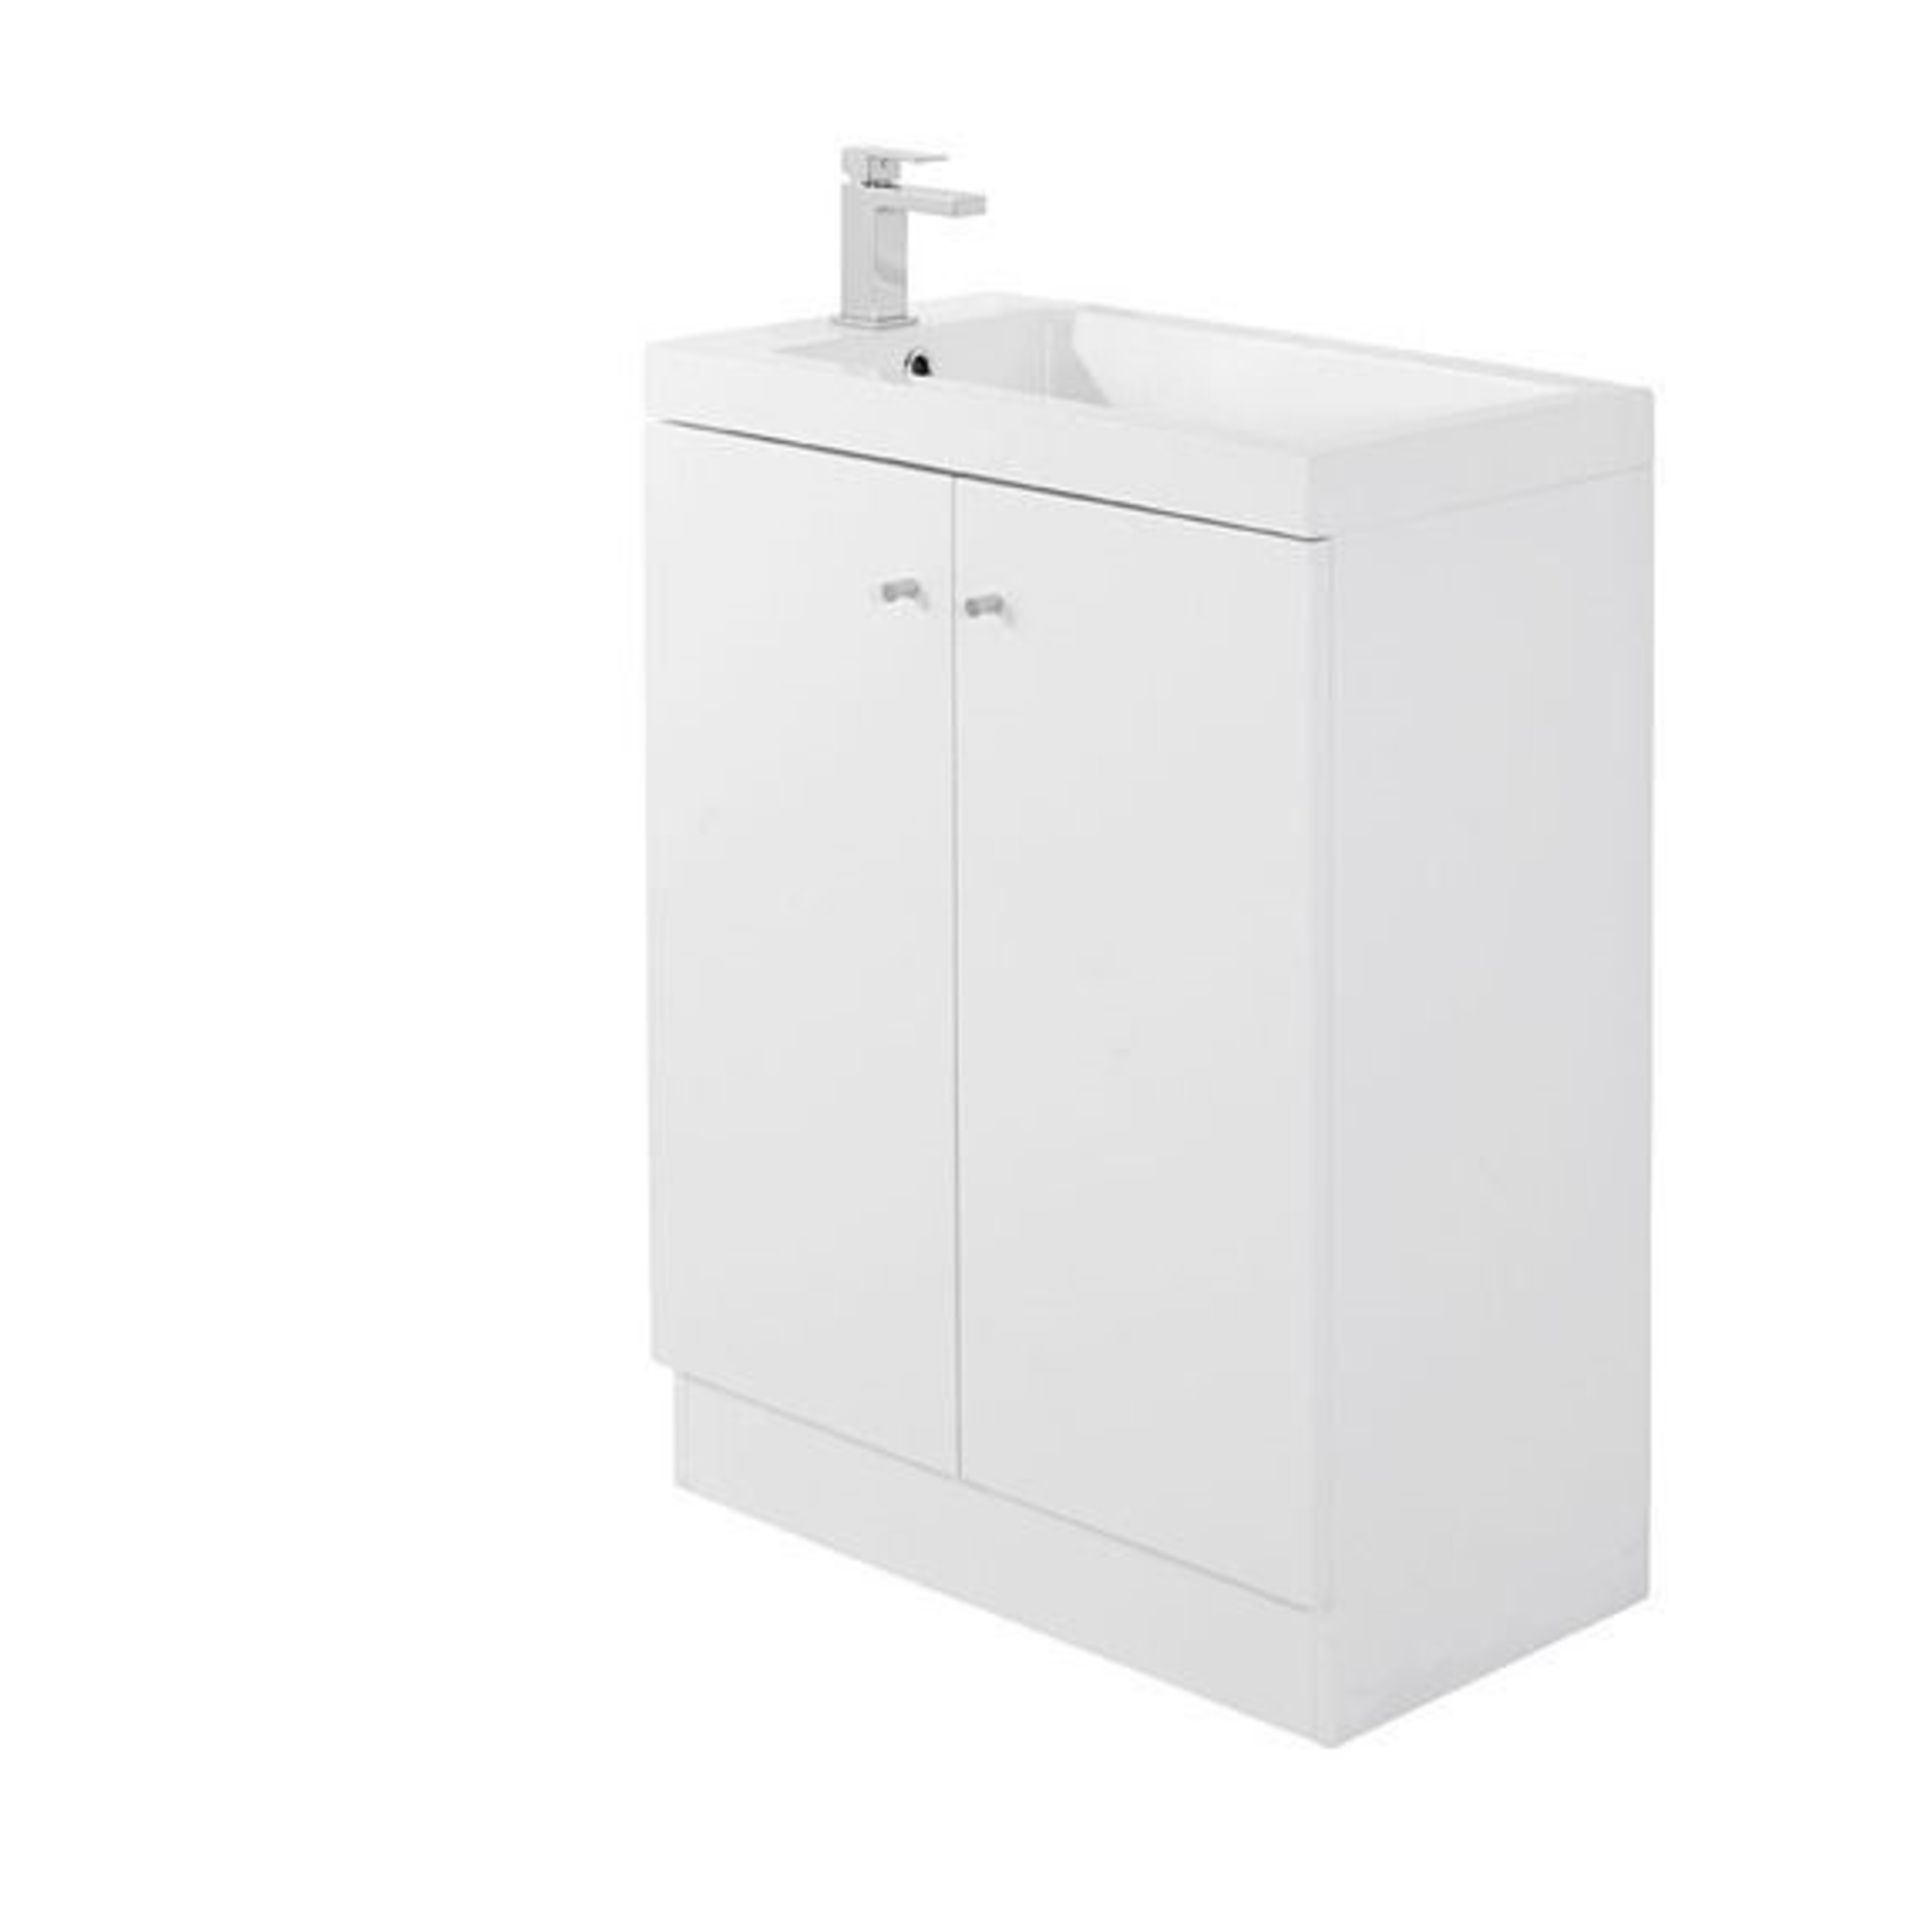 10 x Alpine Duo 660 Floorstanding Vanity Units In Gloss White - Dimensions: H80 x W66 x D35cm - - Image 3 of 4